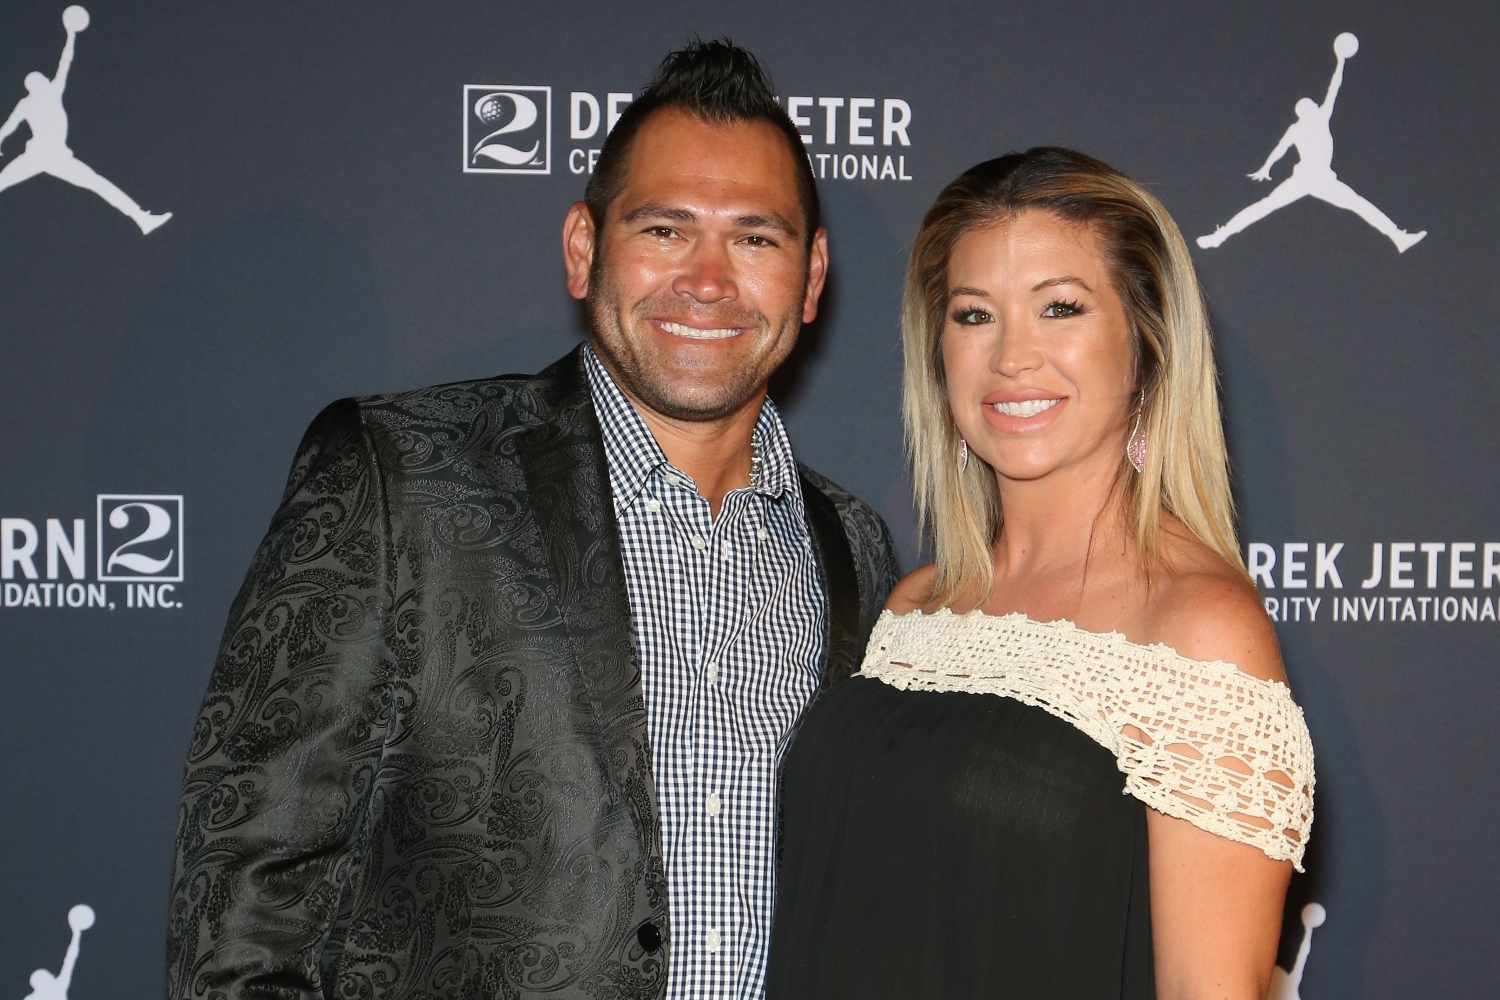 Johnny Damon’s Dangerous Decision and His Wife’s Physical Altercation With Police Has Put the Couple in Hot Legal Water in Florida